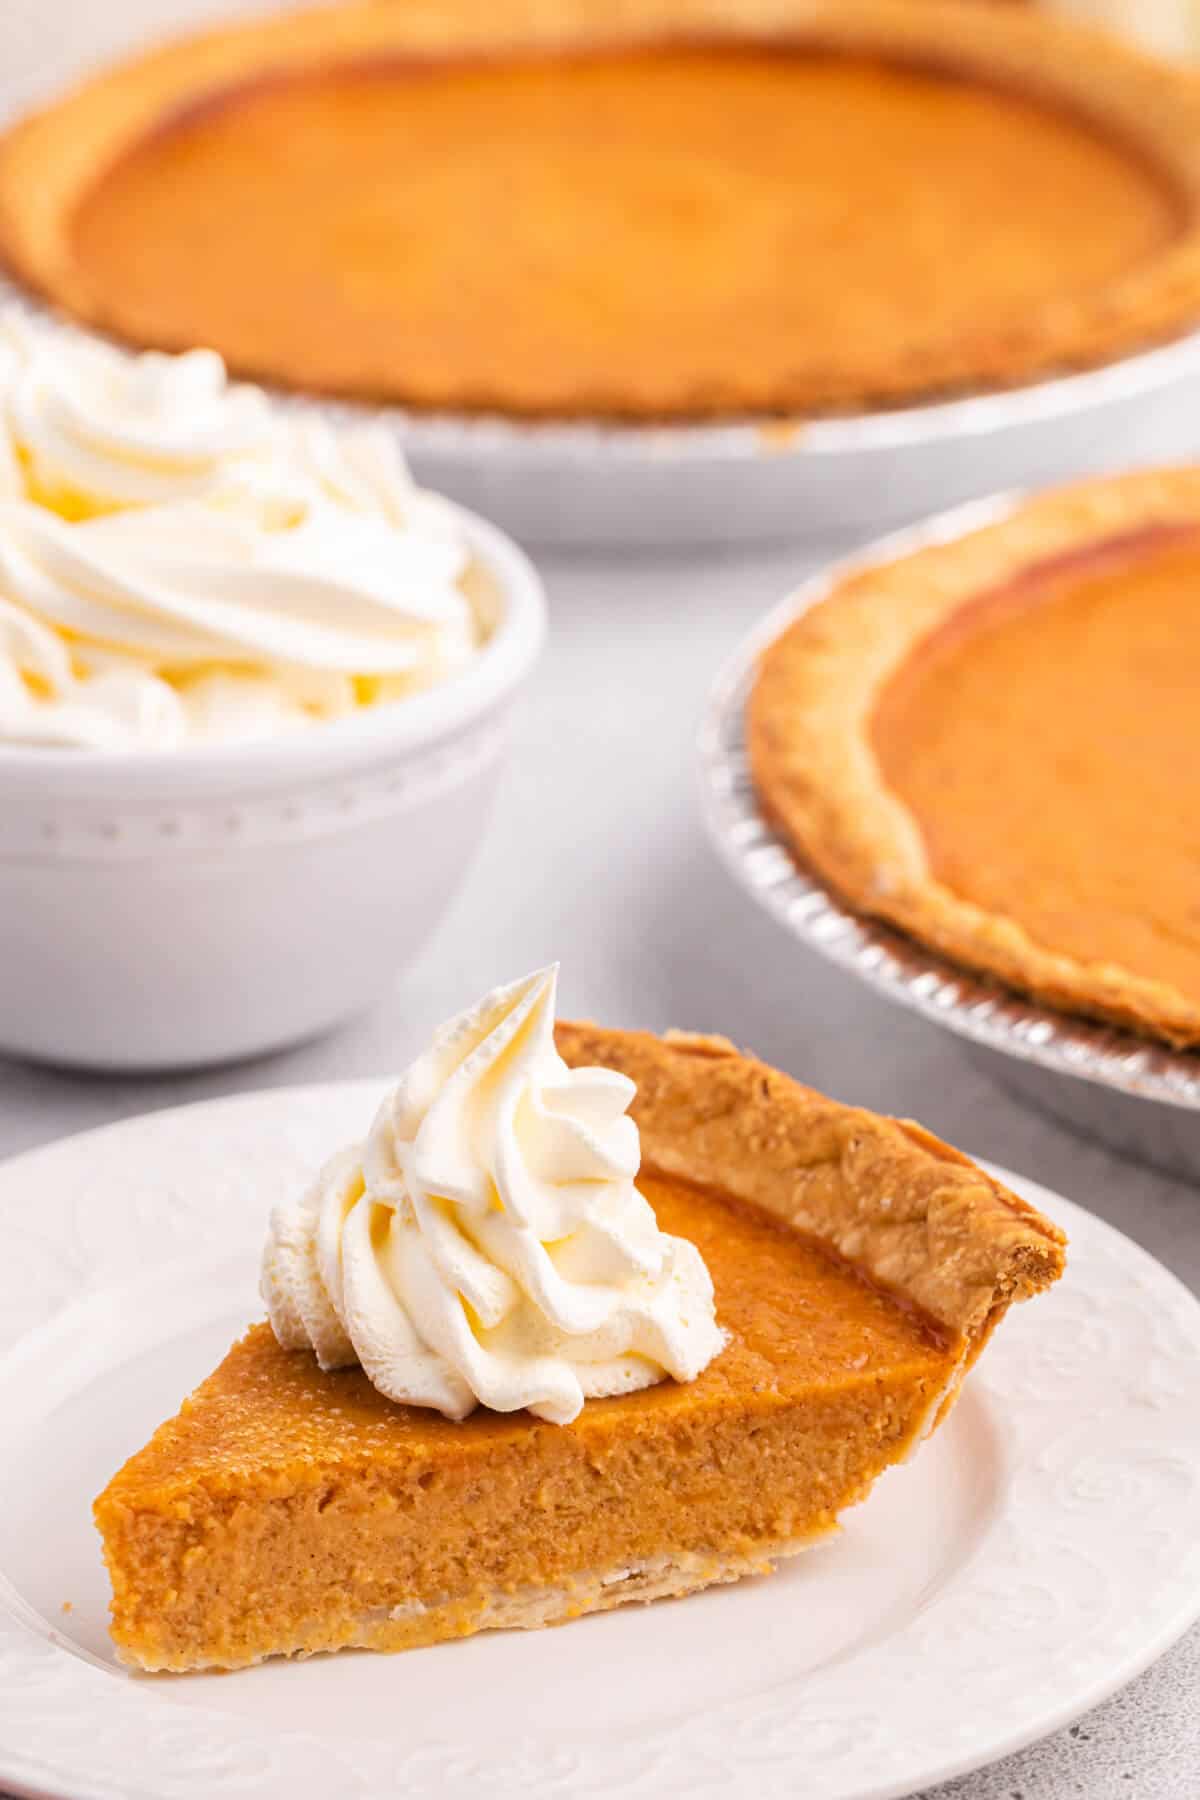 Sweet potato pie slice with whipped cream on a plate.